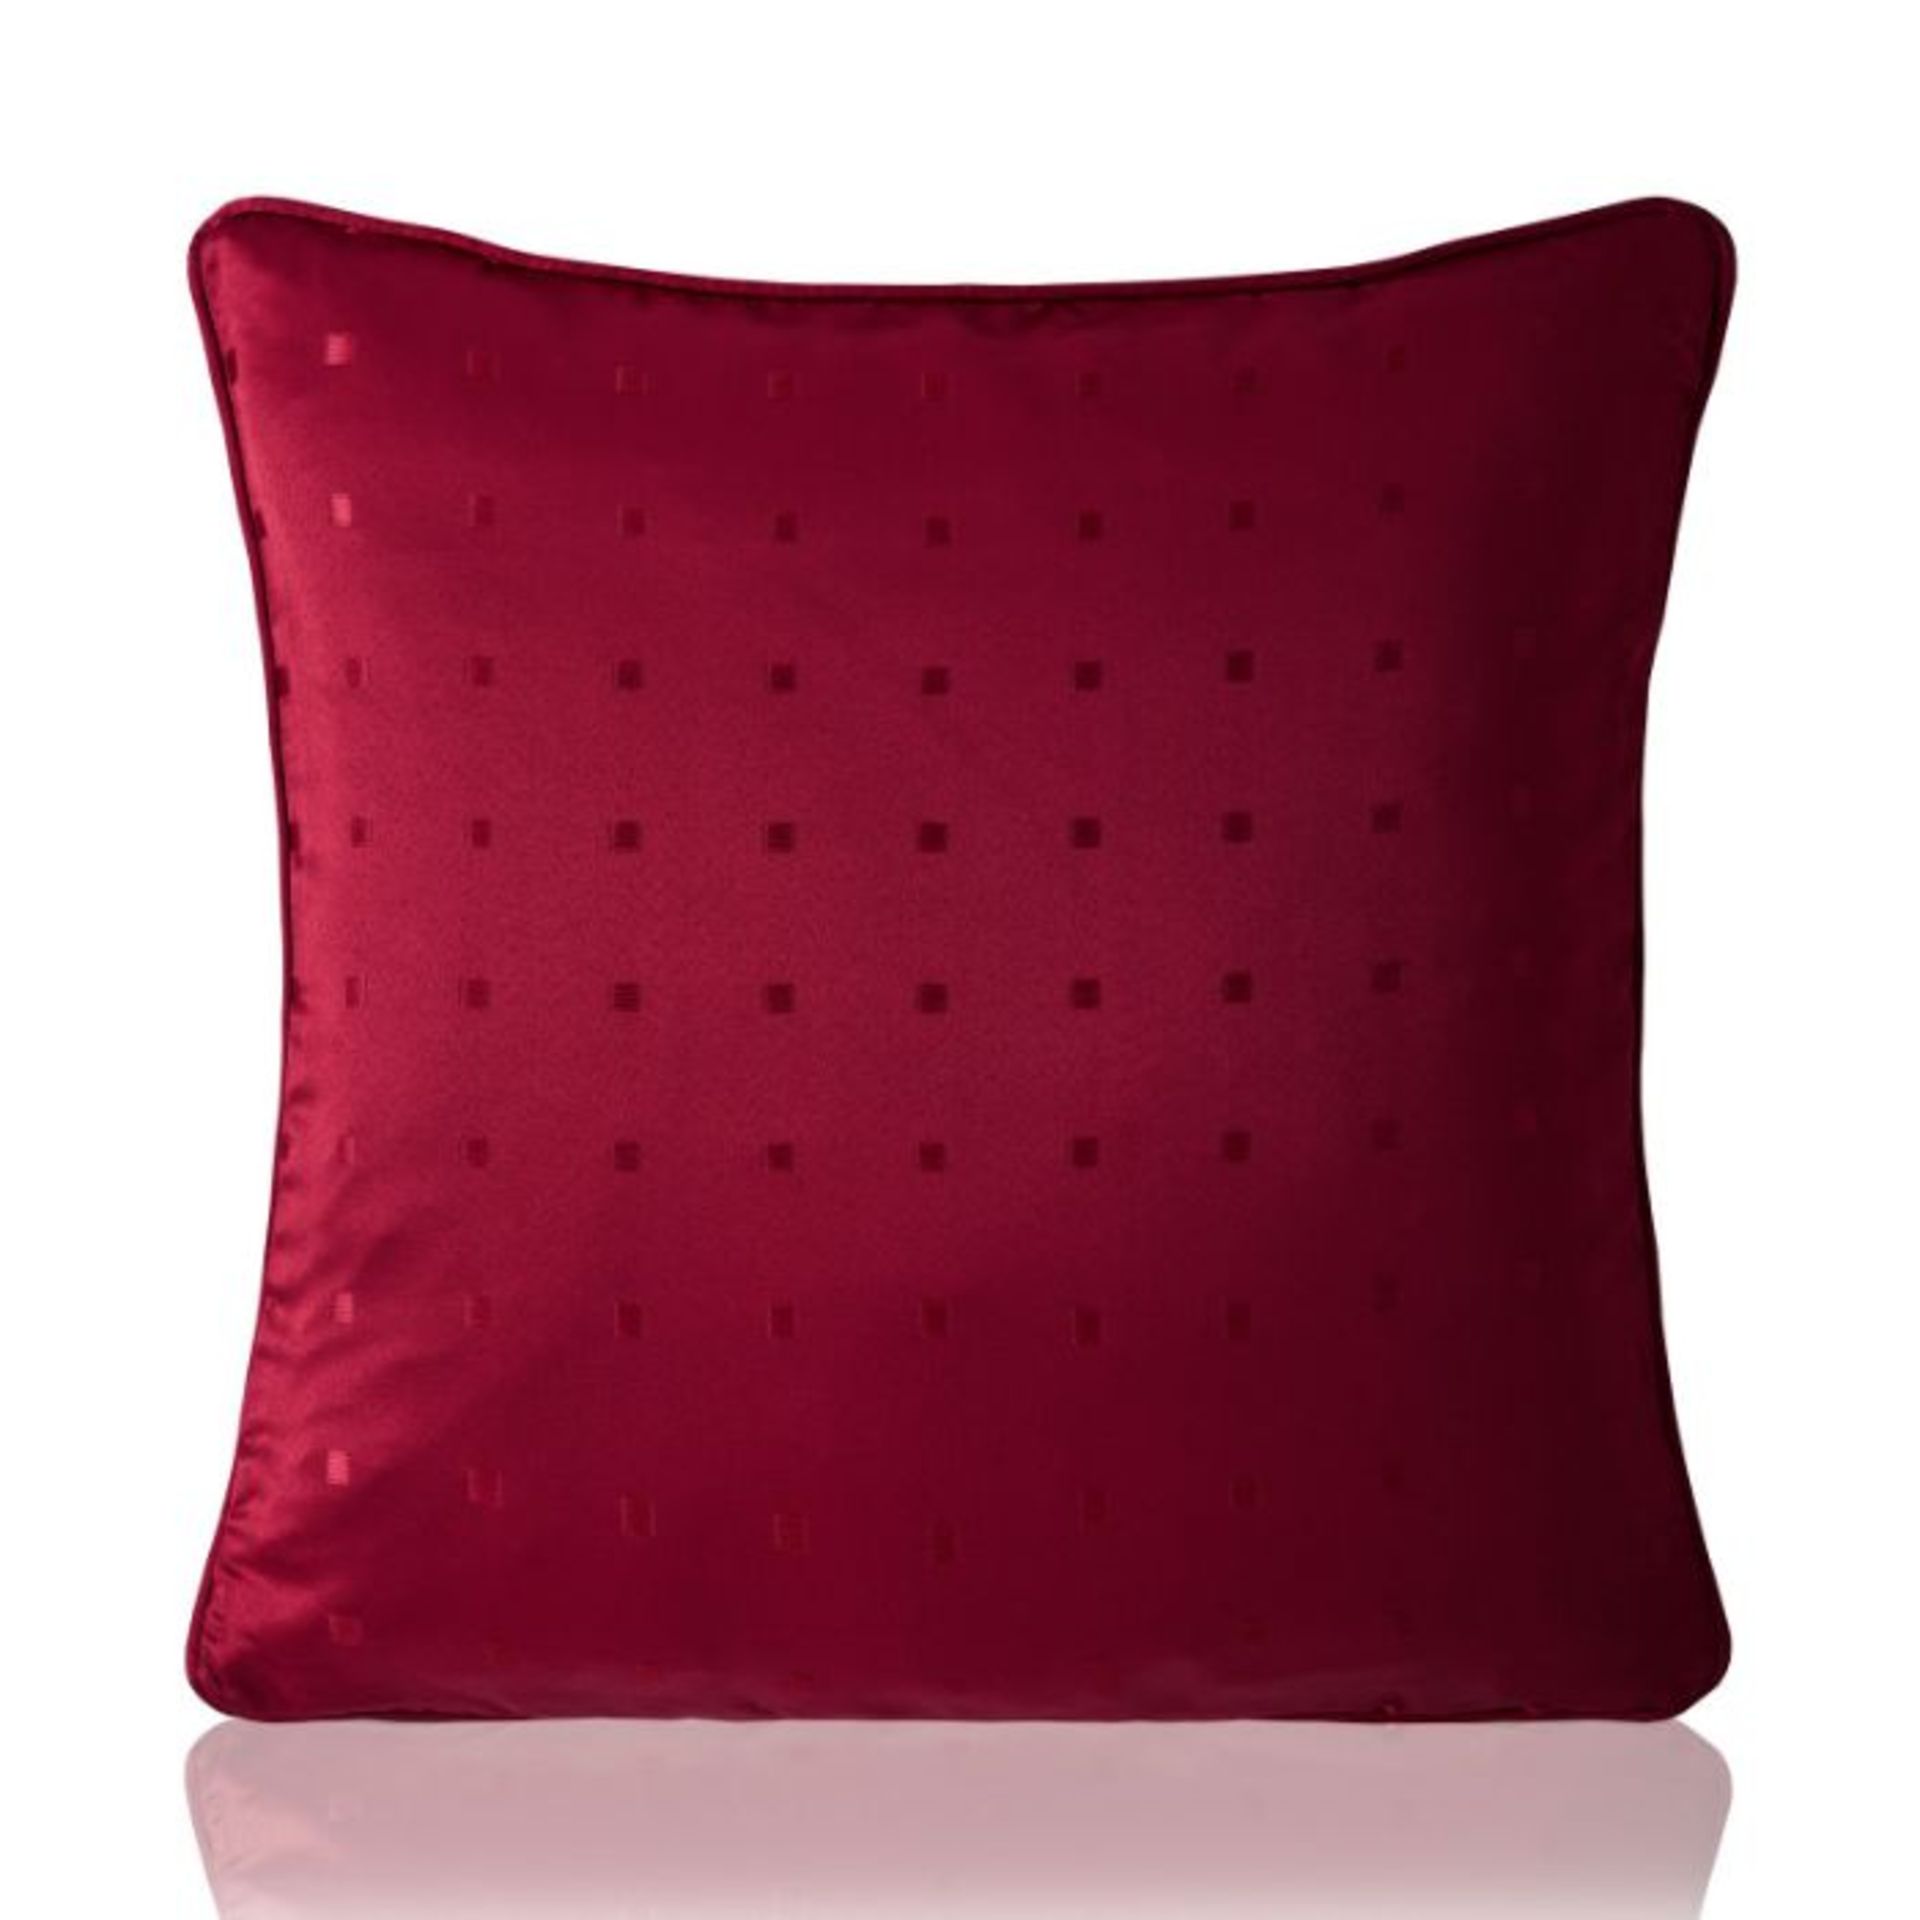 17 Stories, Carlucci Cushion Cover (RED) - RRP £6.59 (ANSY1376 - 26639/27)